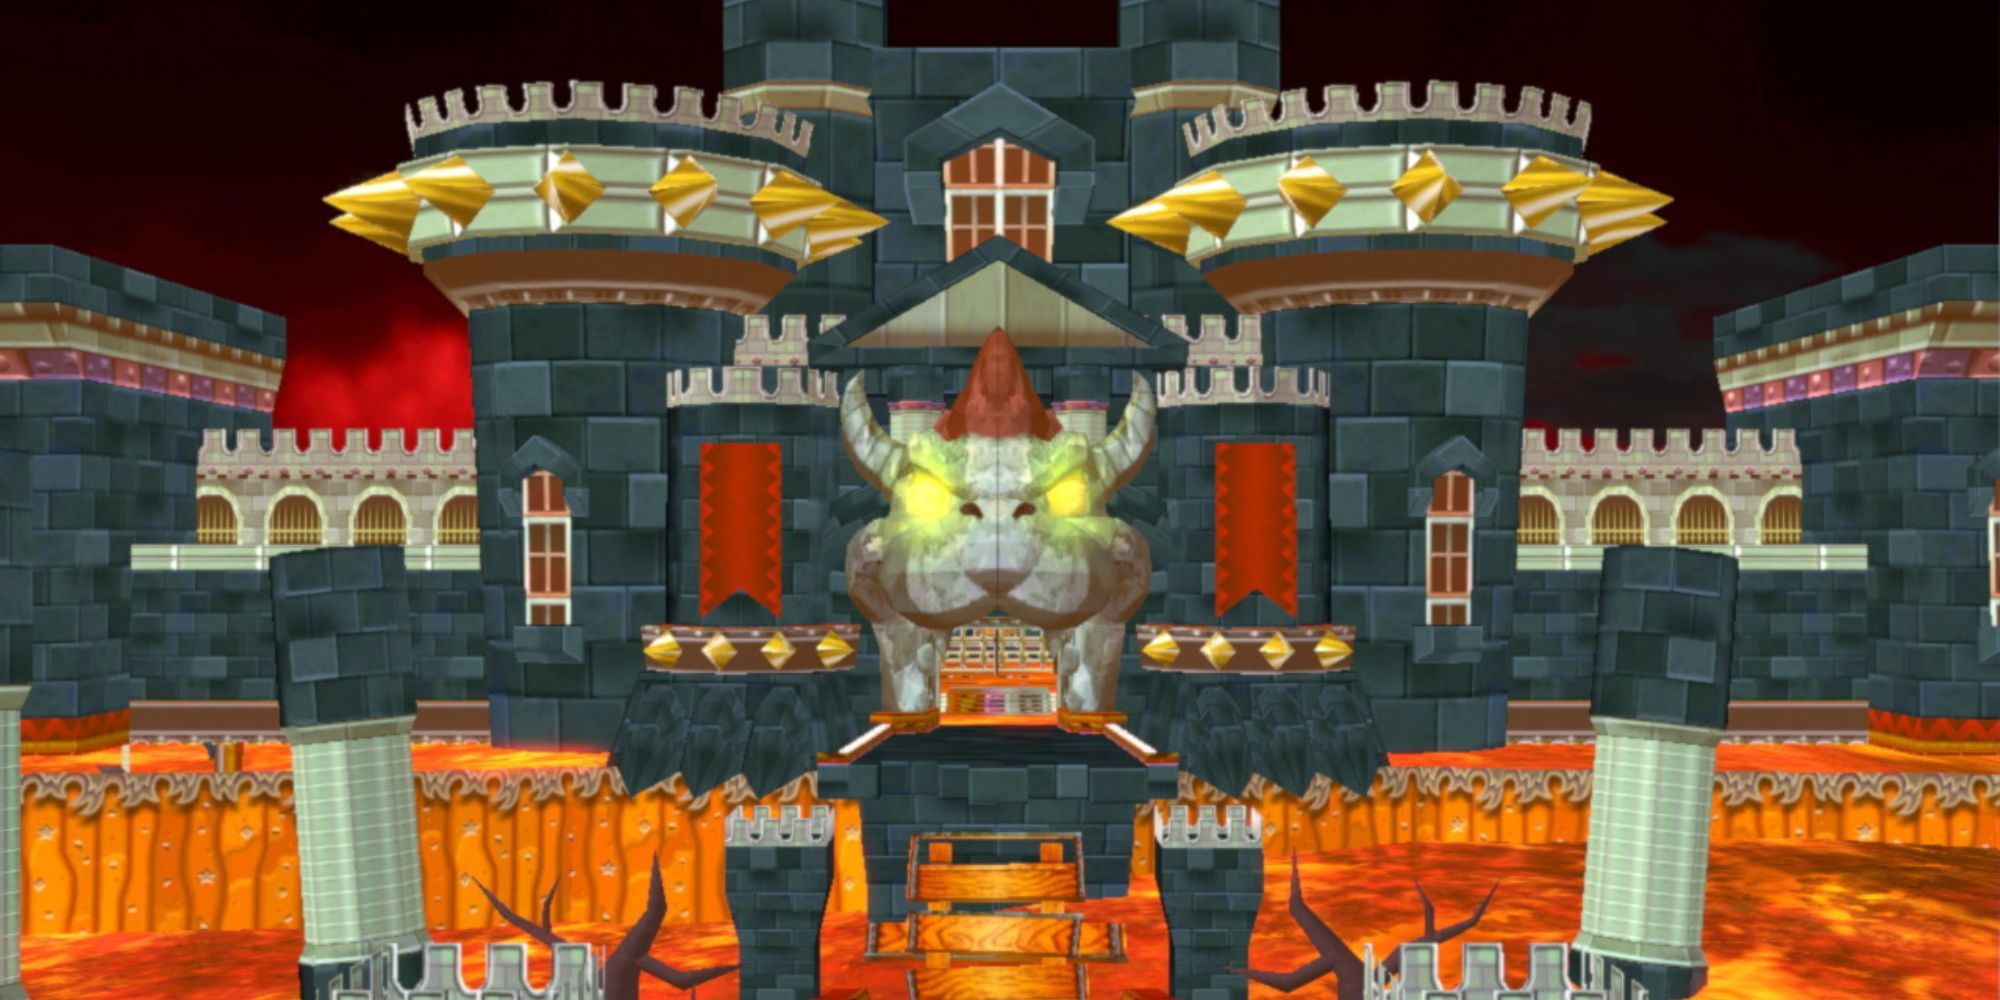 super smash bros bowser's castle surrounded by moat of lava